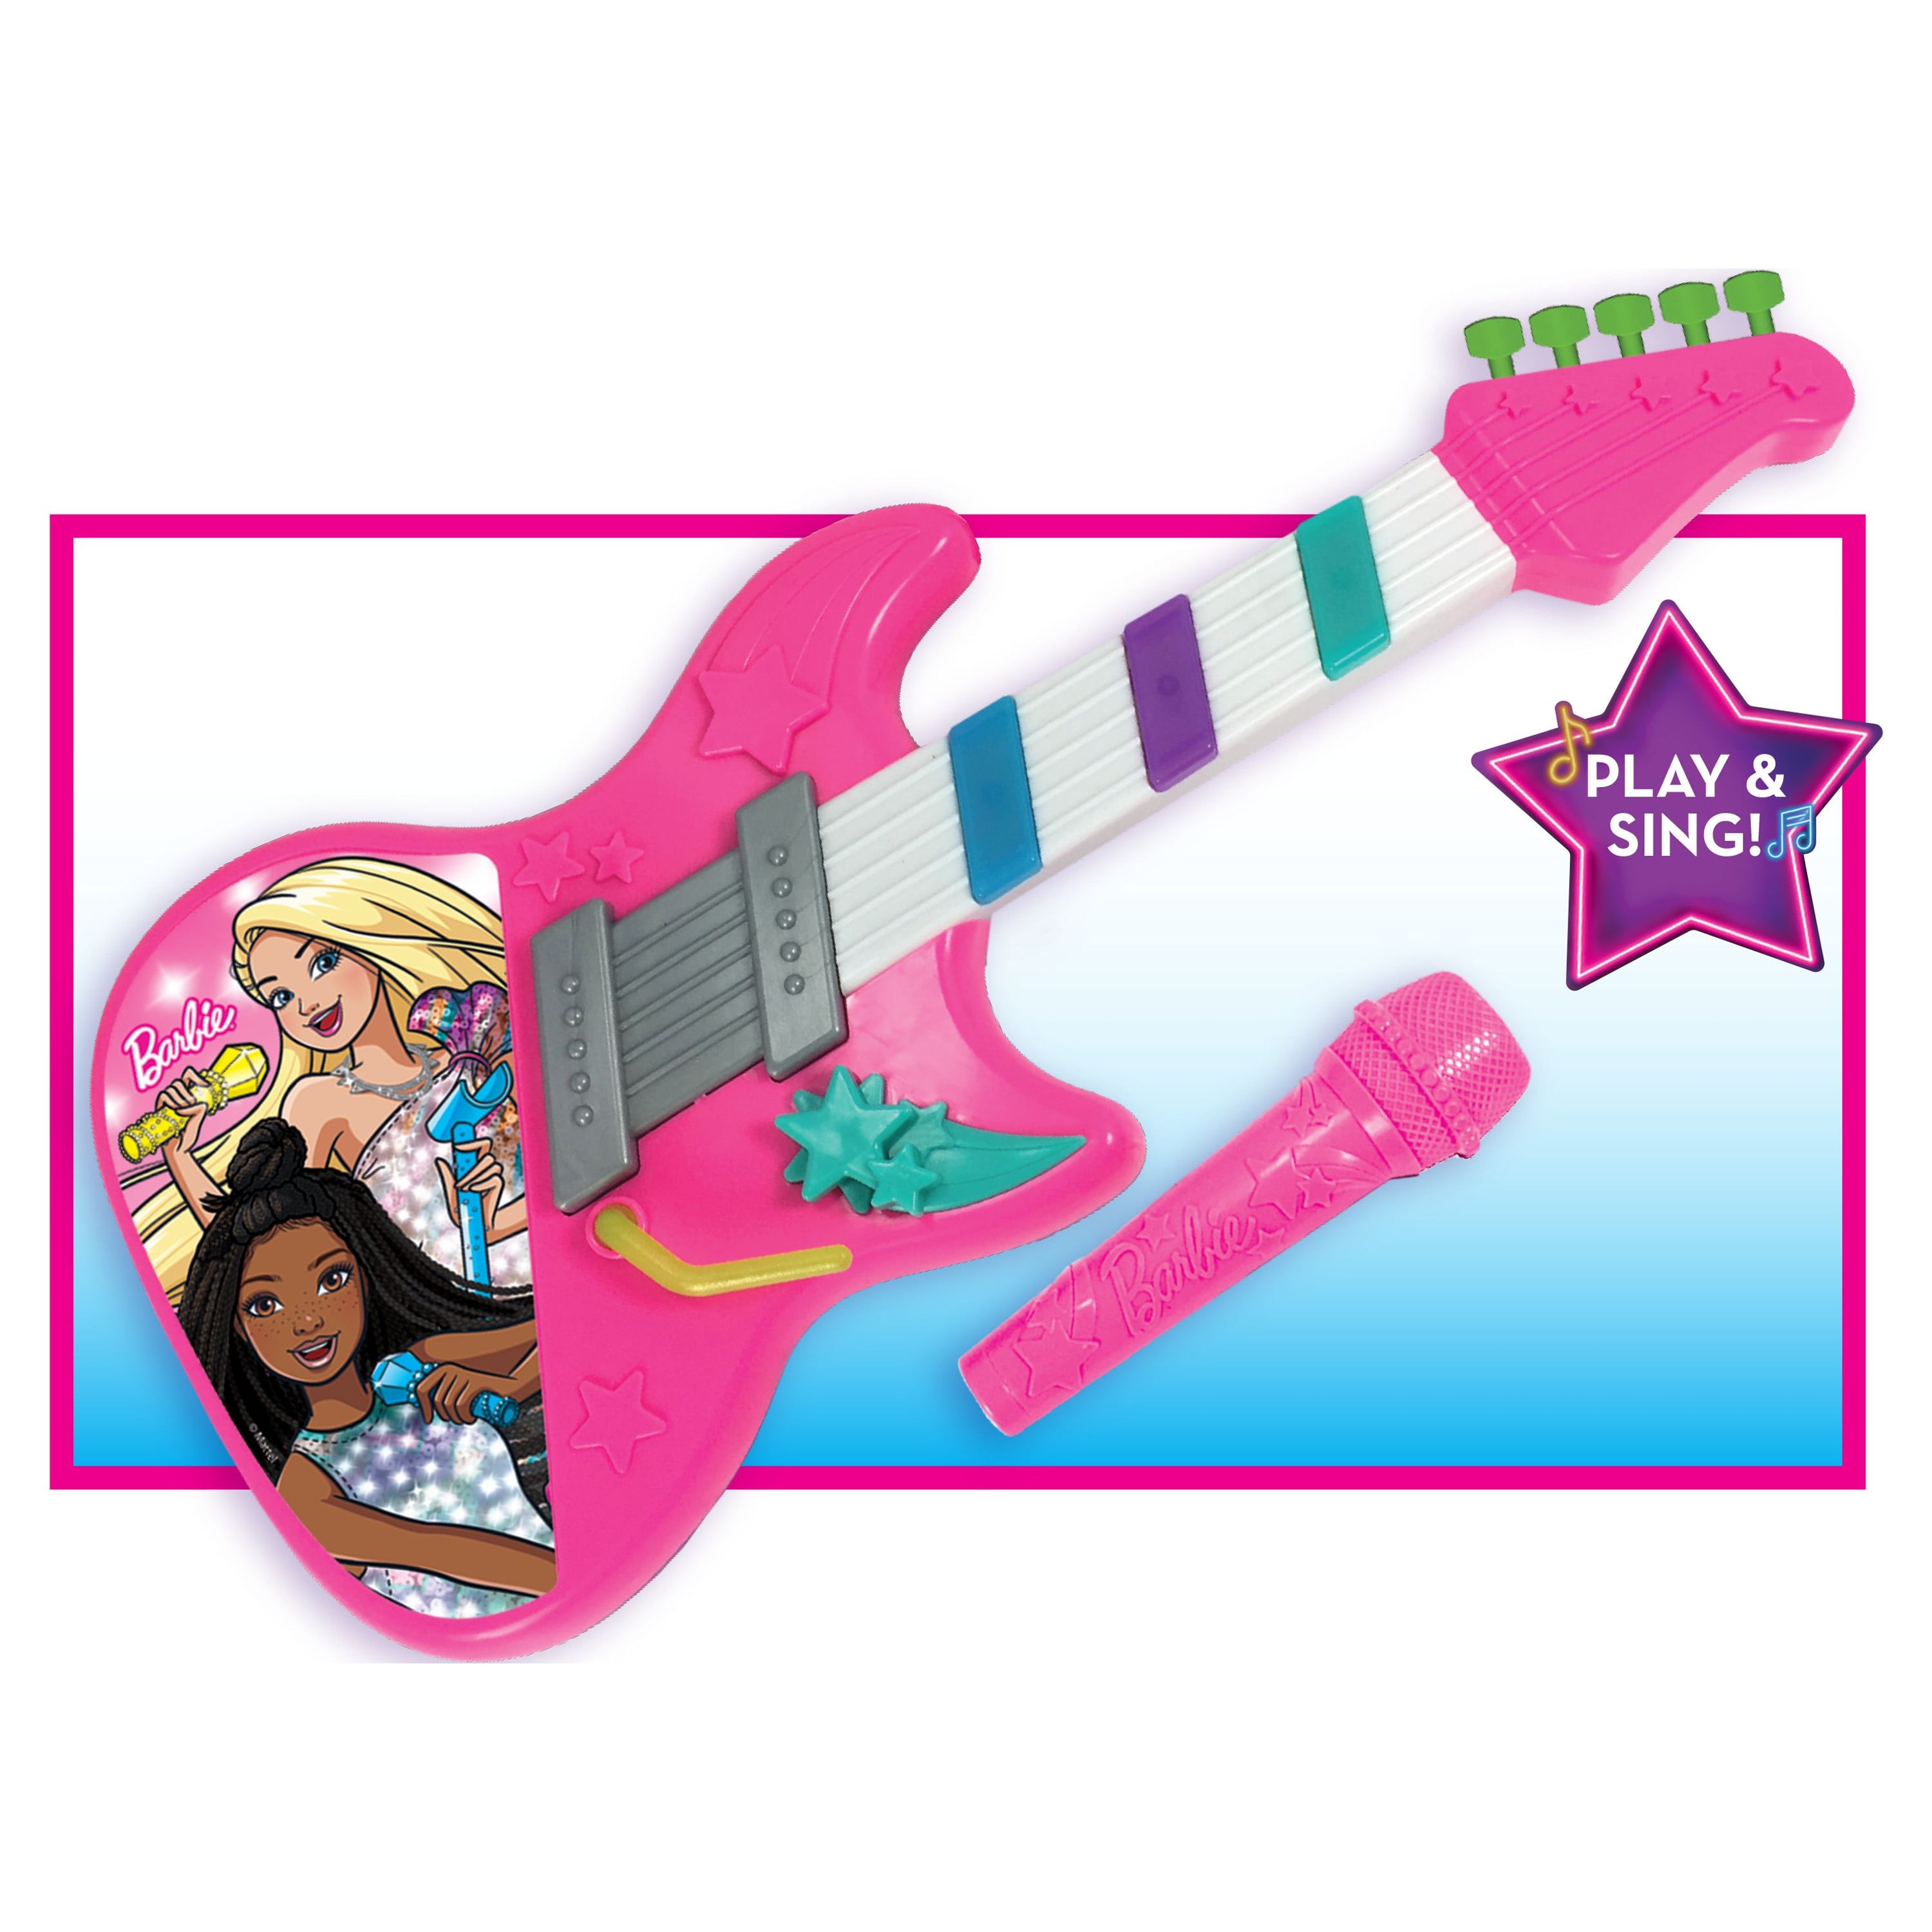 Barbie Rock Star Guitar, Interactive Electronic Toy Guitar with Lights, Sounds, and Microphone,  Kids Toys for Ages 3 Up, Gifts and Presents - image 6 of 11